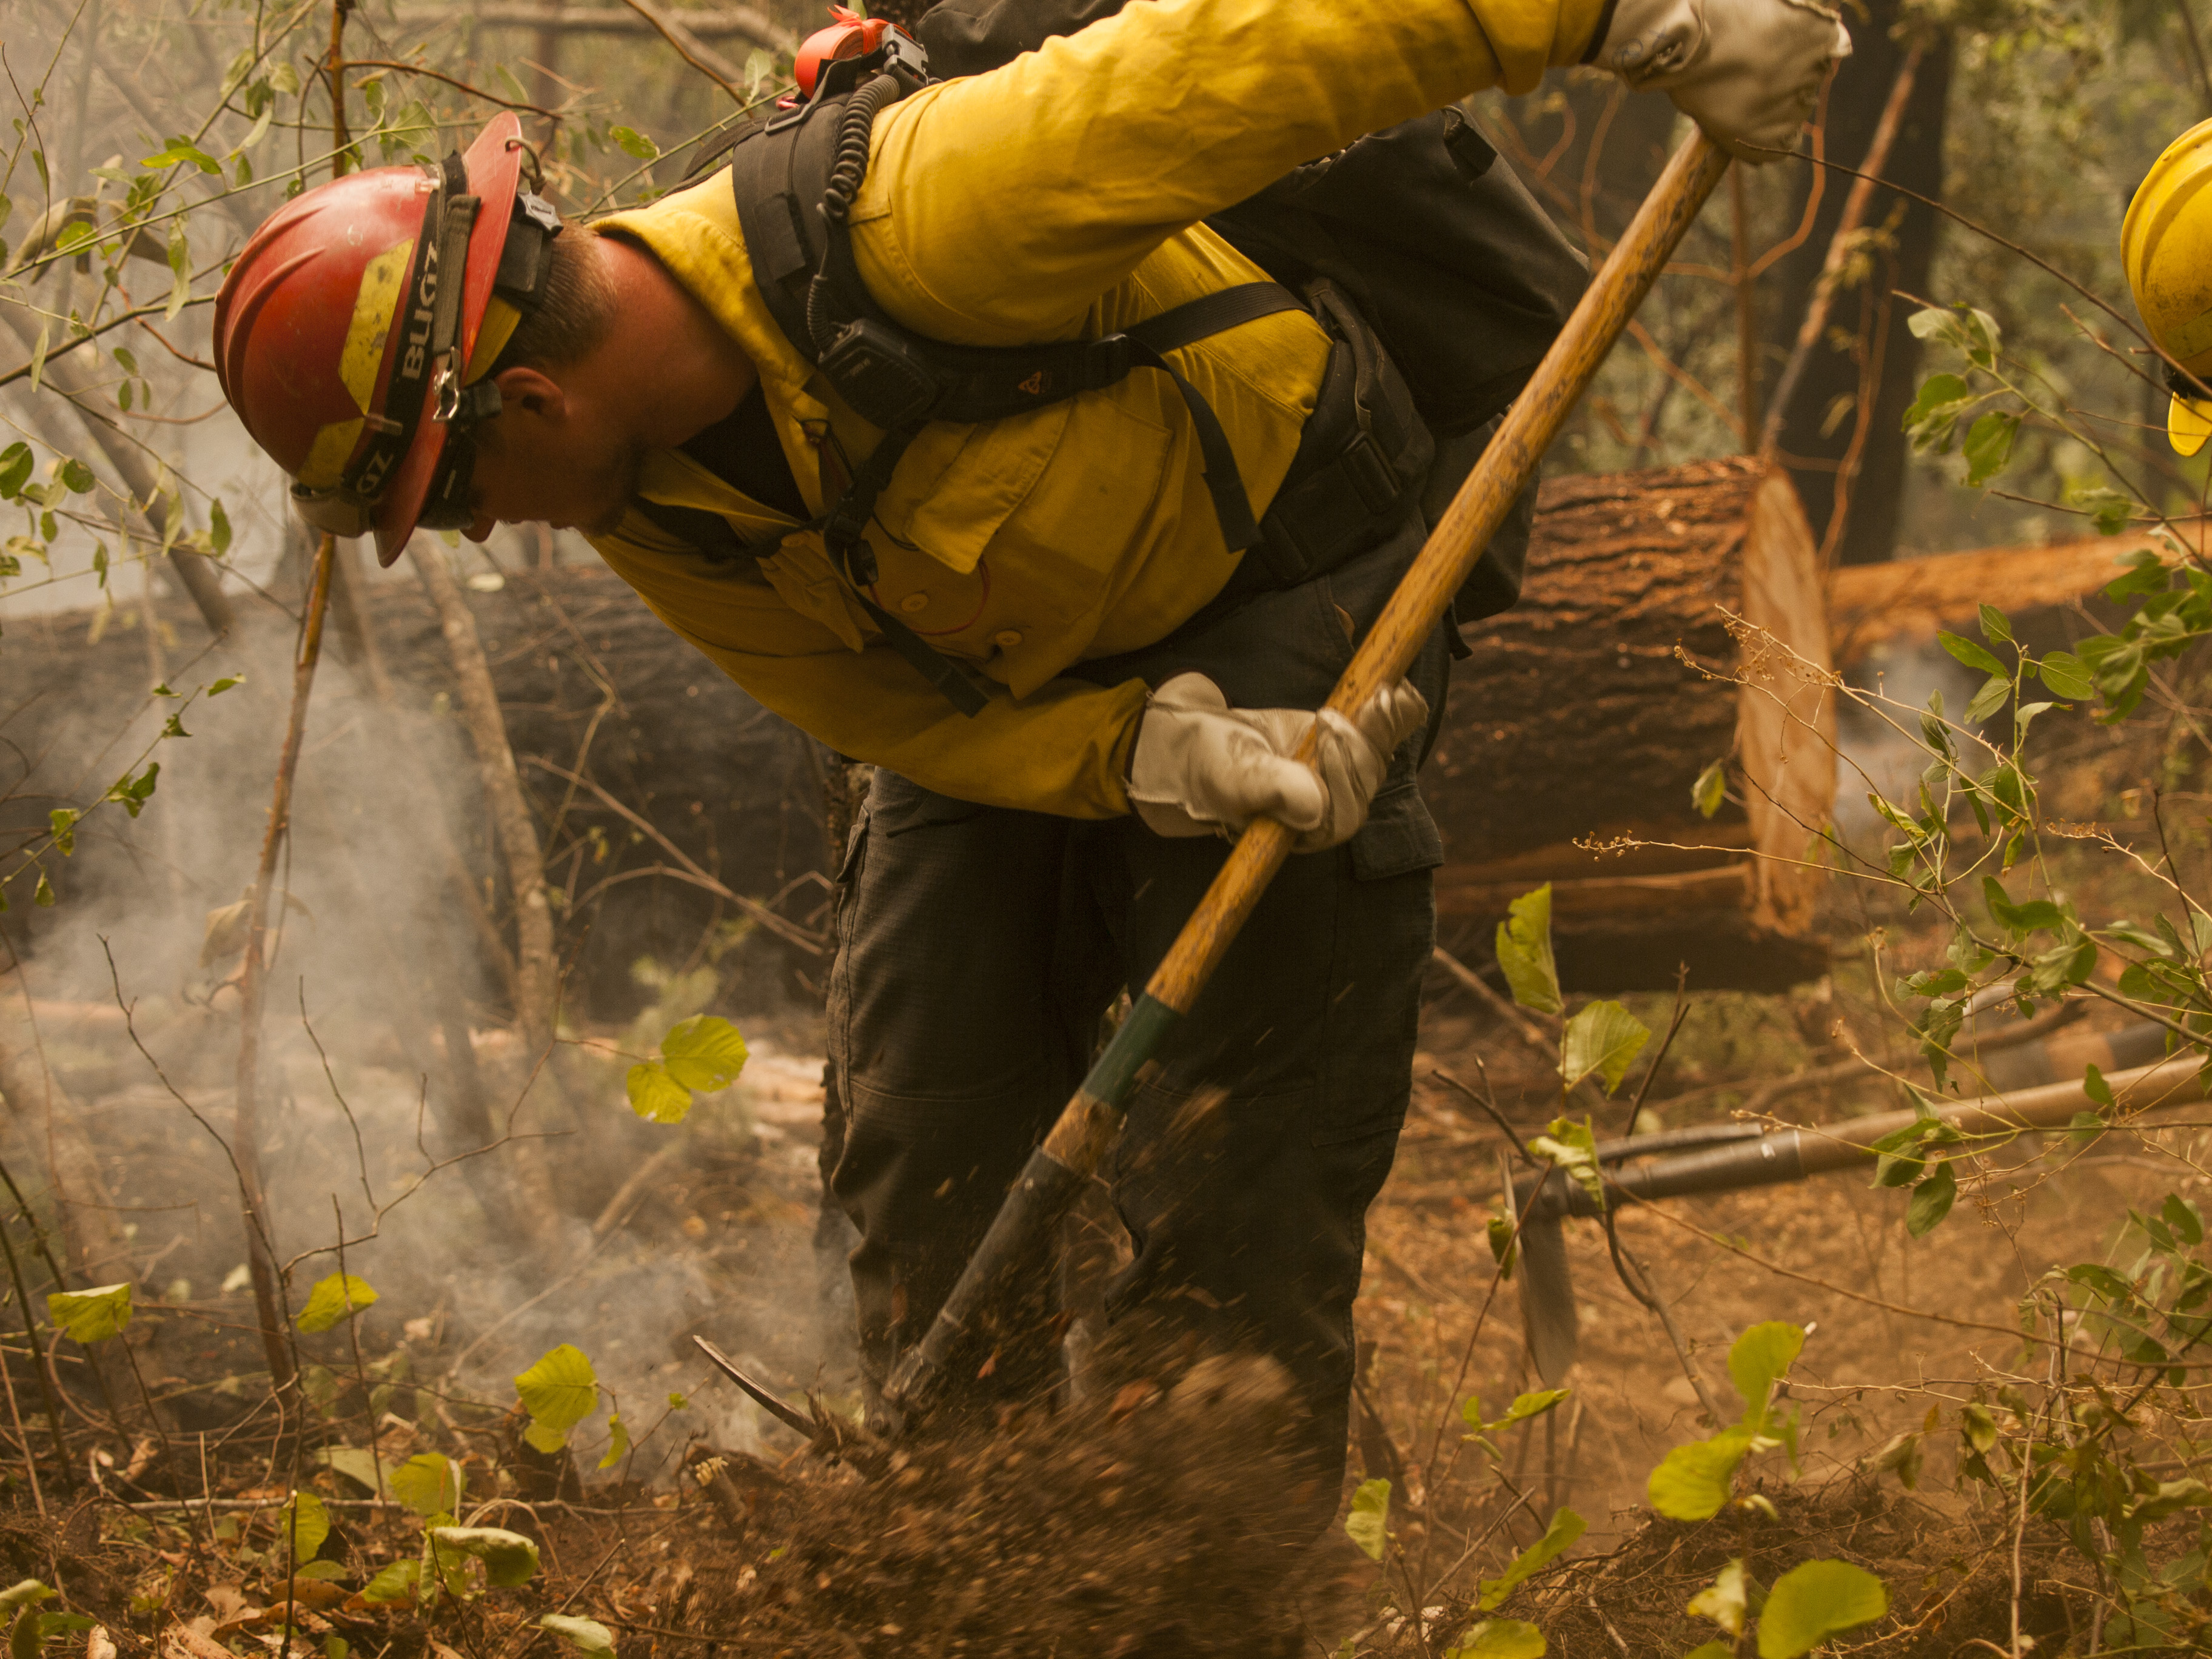 A wildland firefighter using a hand tool to dig and clear ground cover from a fire break.